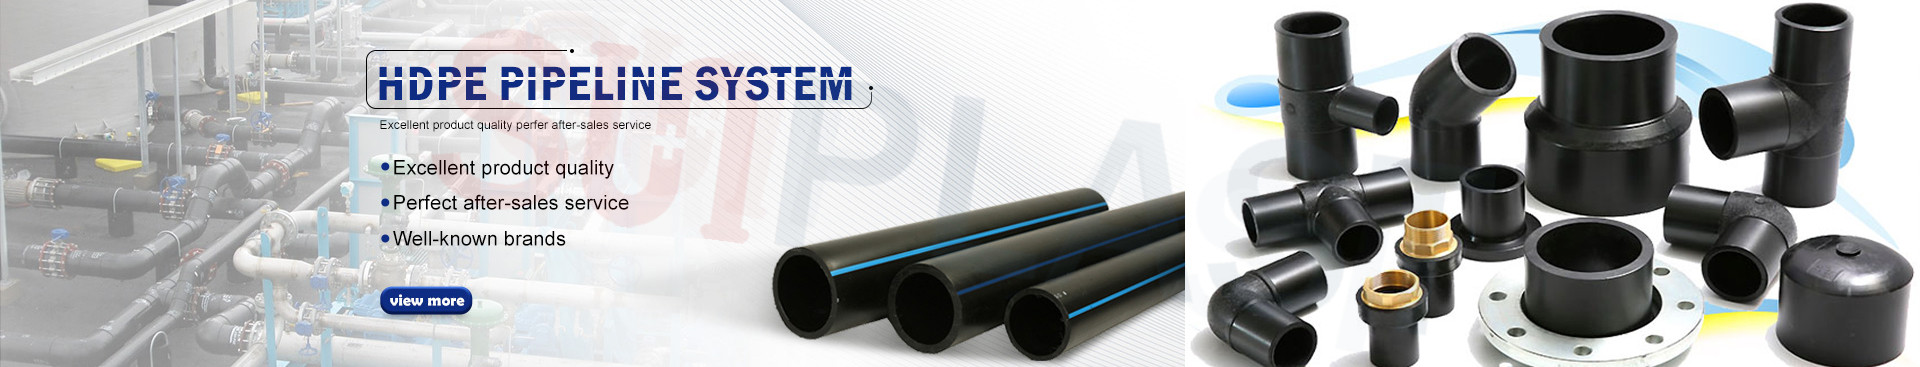 hdpe-gas-pipe